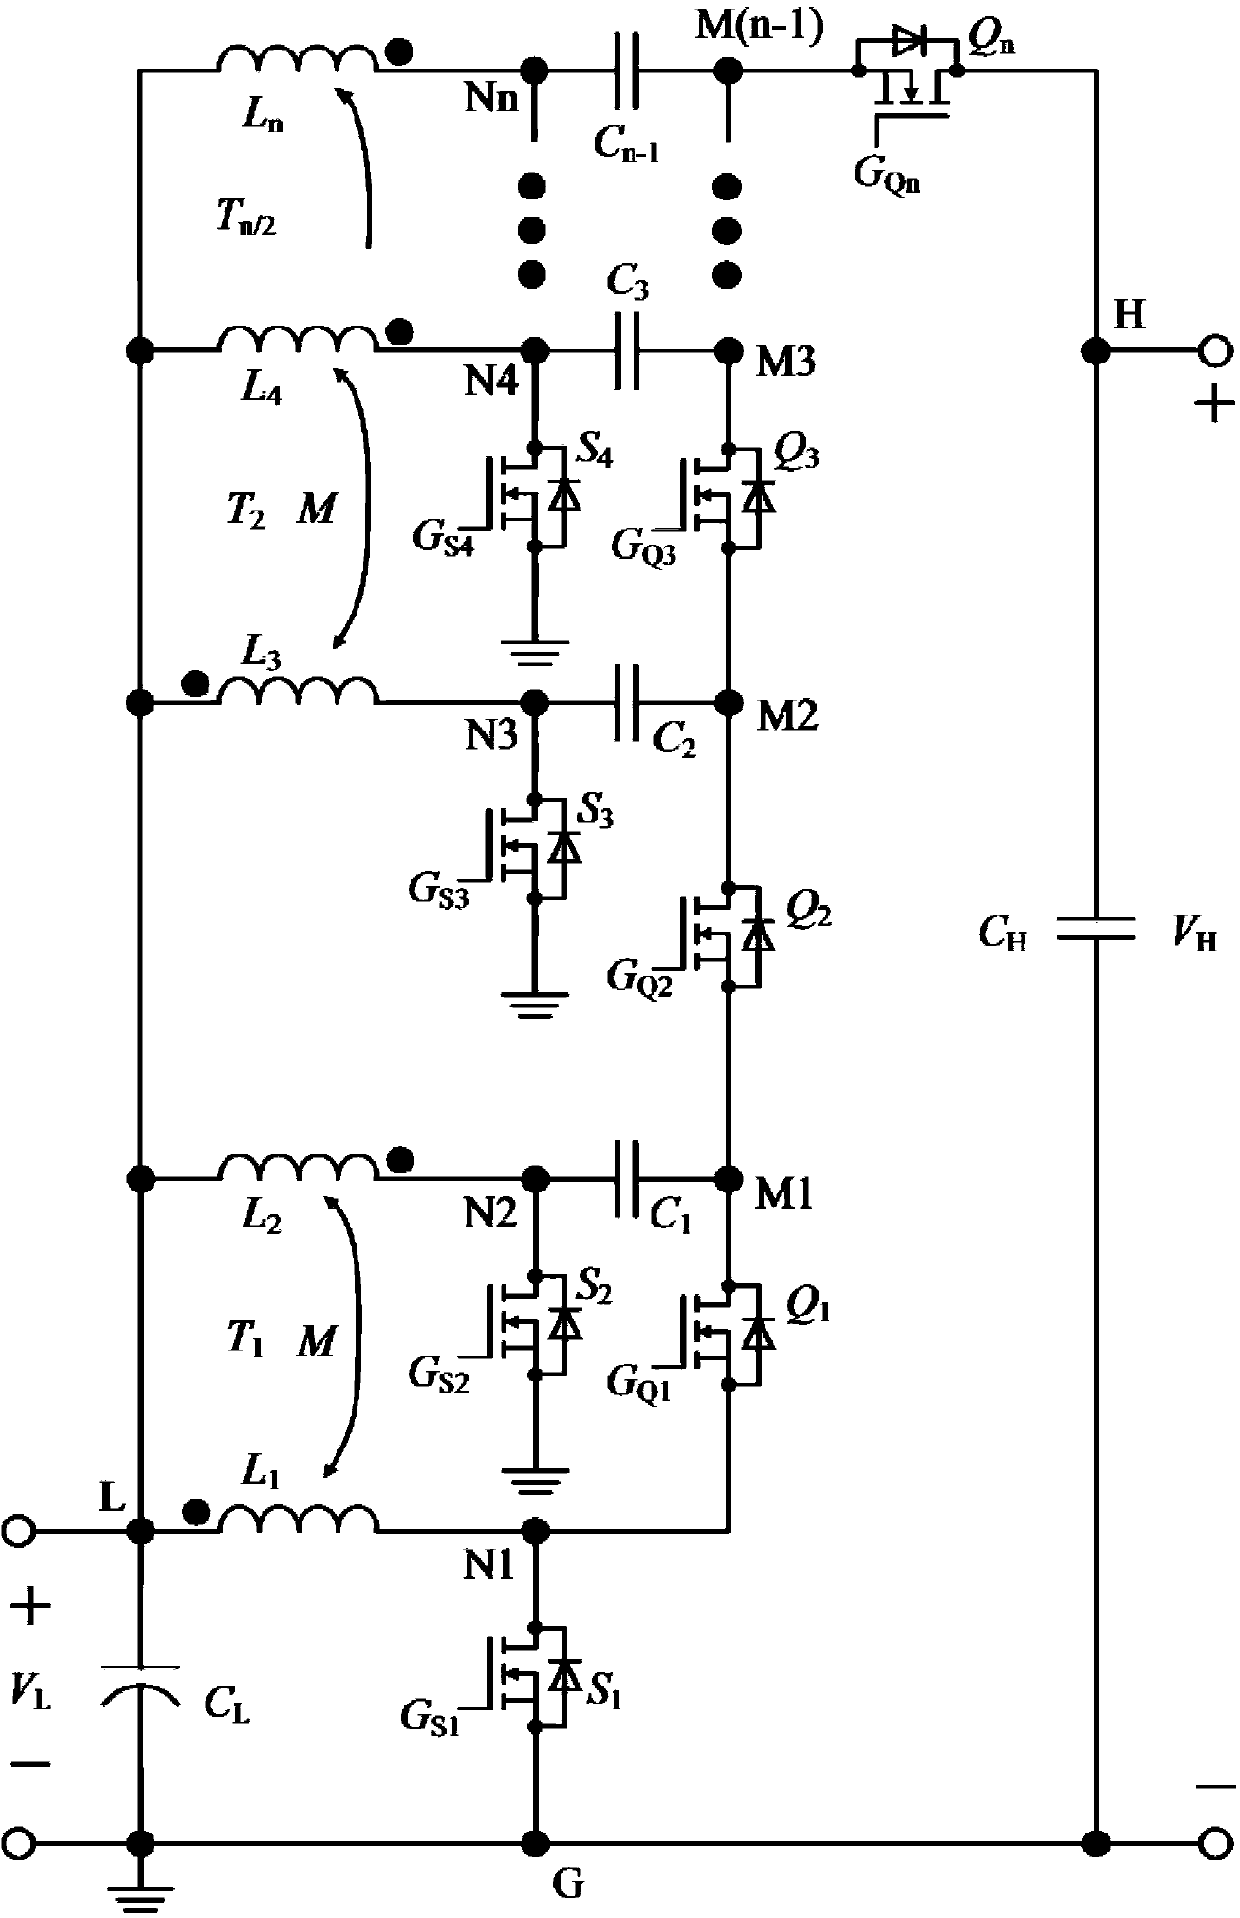 High voltage gain bidirectional DC-DC (direct current-direct current) converter based on switching capacitors and coupling inductors